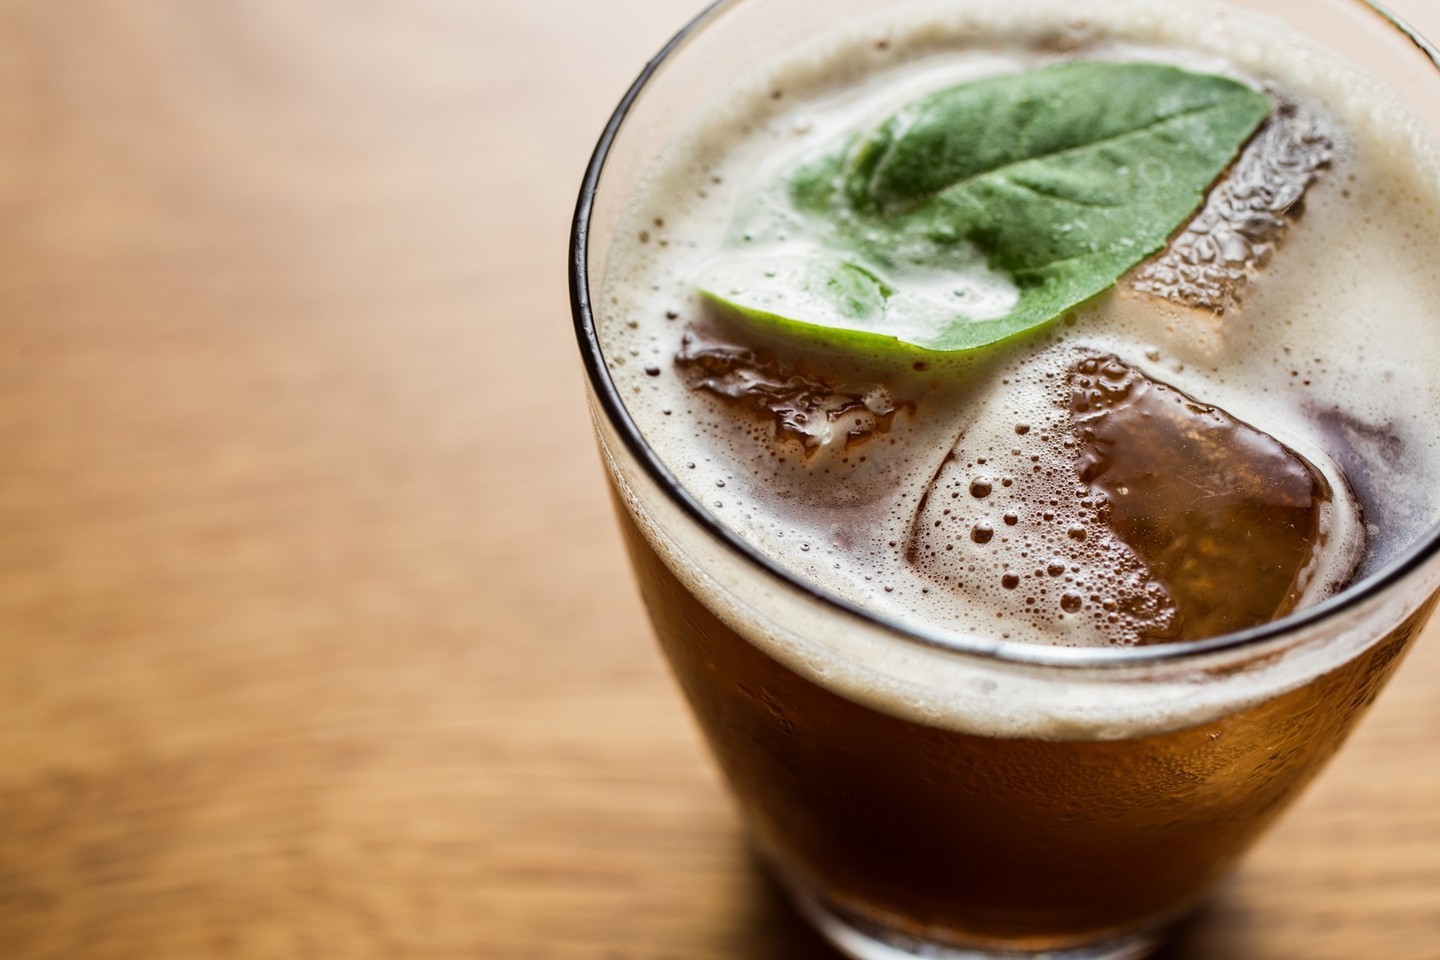 Cool off with the perfect cocktail: The Poet features high west double rye, balsamic vinegar, charred honey whiskey, and thai basil.⁠
.⁠
.⁠
.⁠
#drinkhighwest #cocktails #charleston #southofbroad #chsdrinks #chseats